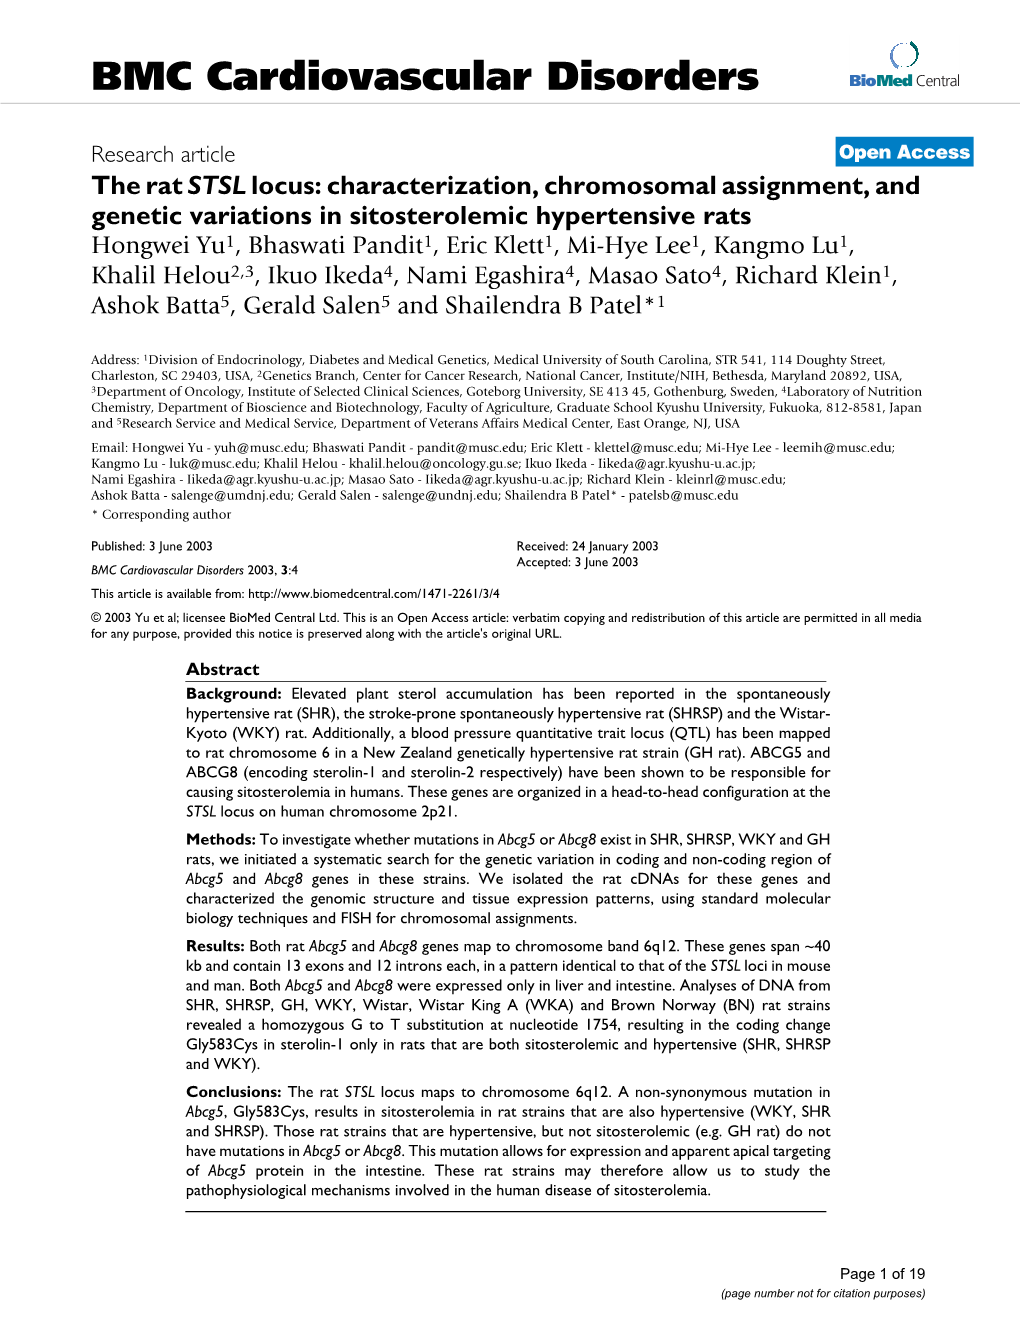 The Rat STSL Locus: Characterization, Chromosomal Assignment, And